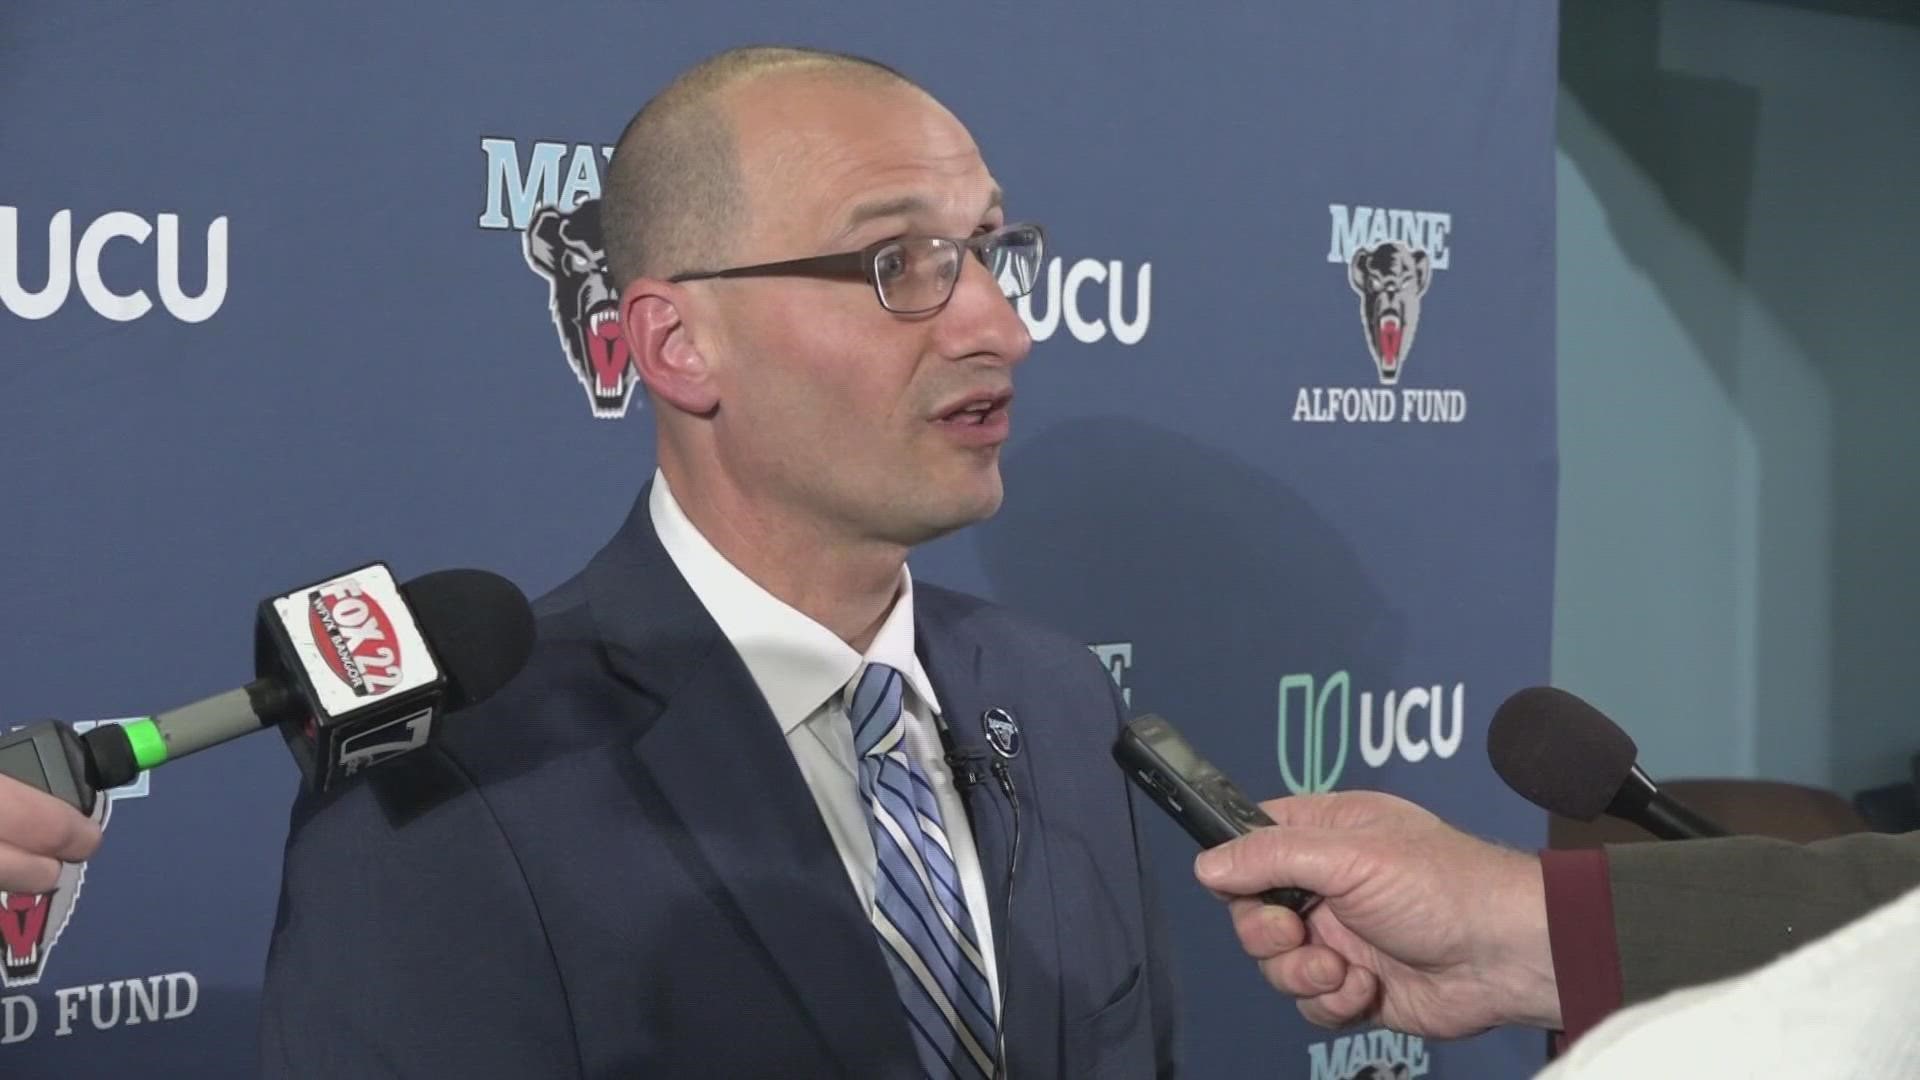 The University of Maine formally welcomed Jude Killy to lead Maine Black Bear Nation as the new athletic director on Tuesday.